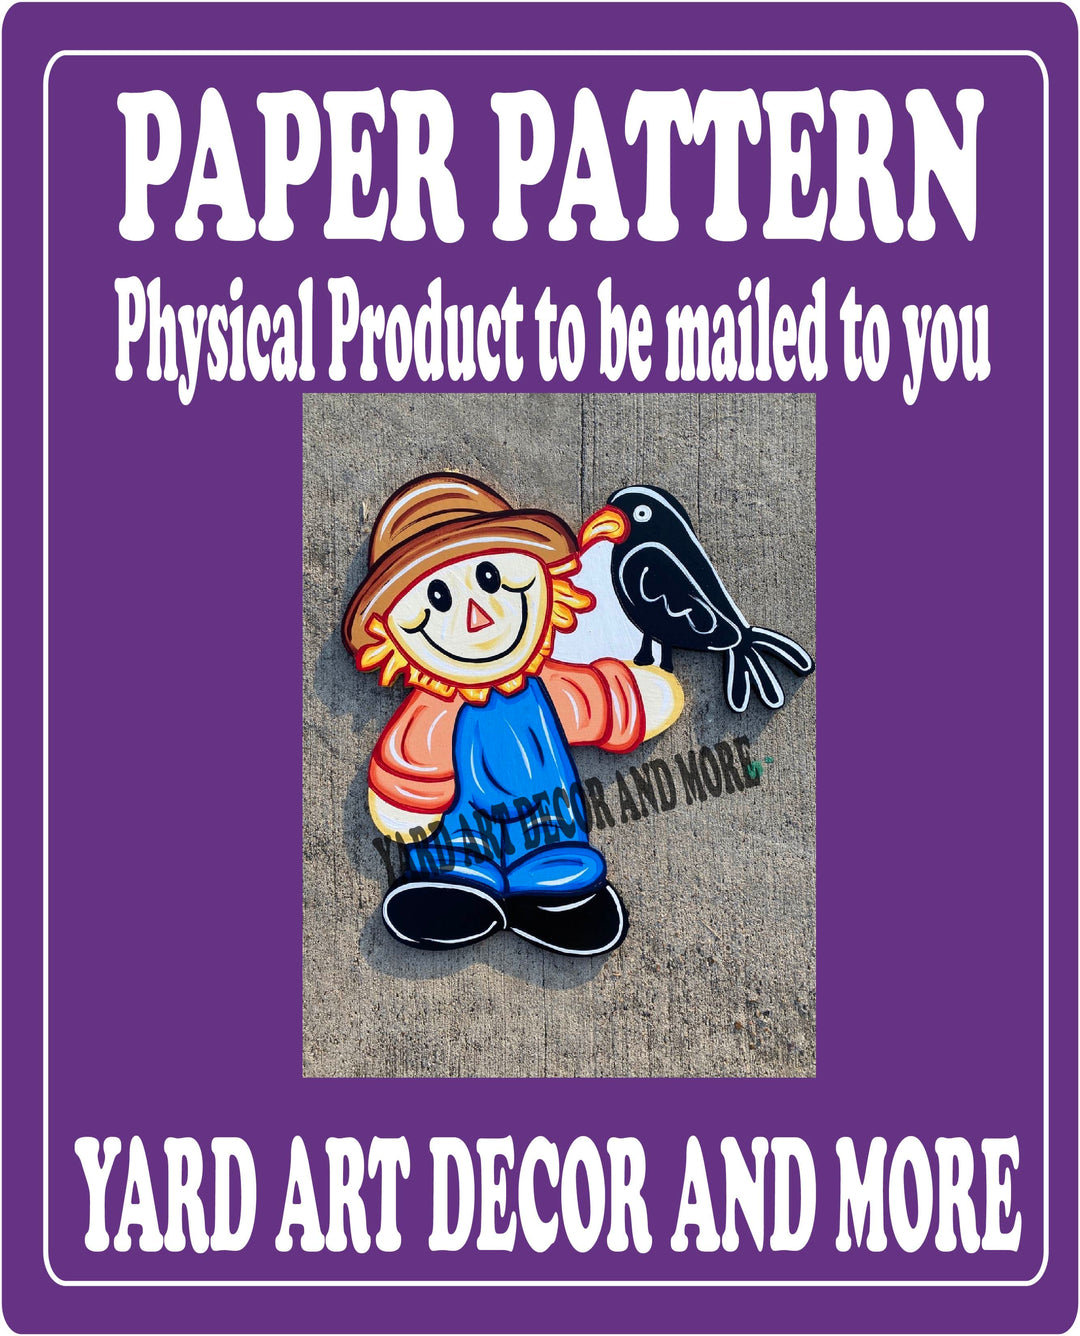 Fall Scarecrow Crow on Arm Yard Art Decor Paper Patterm